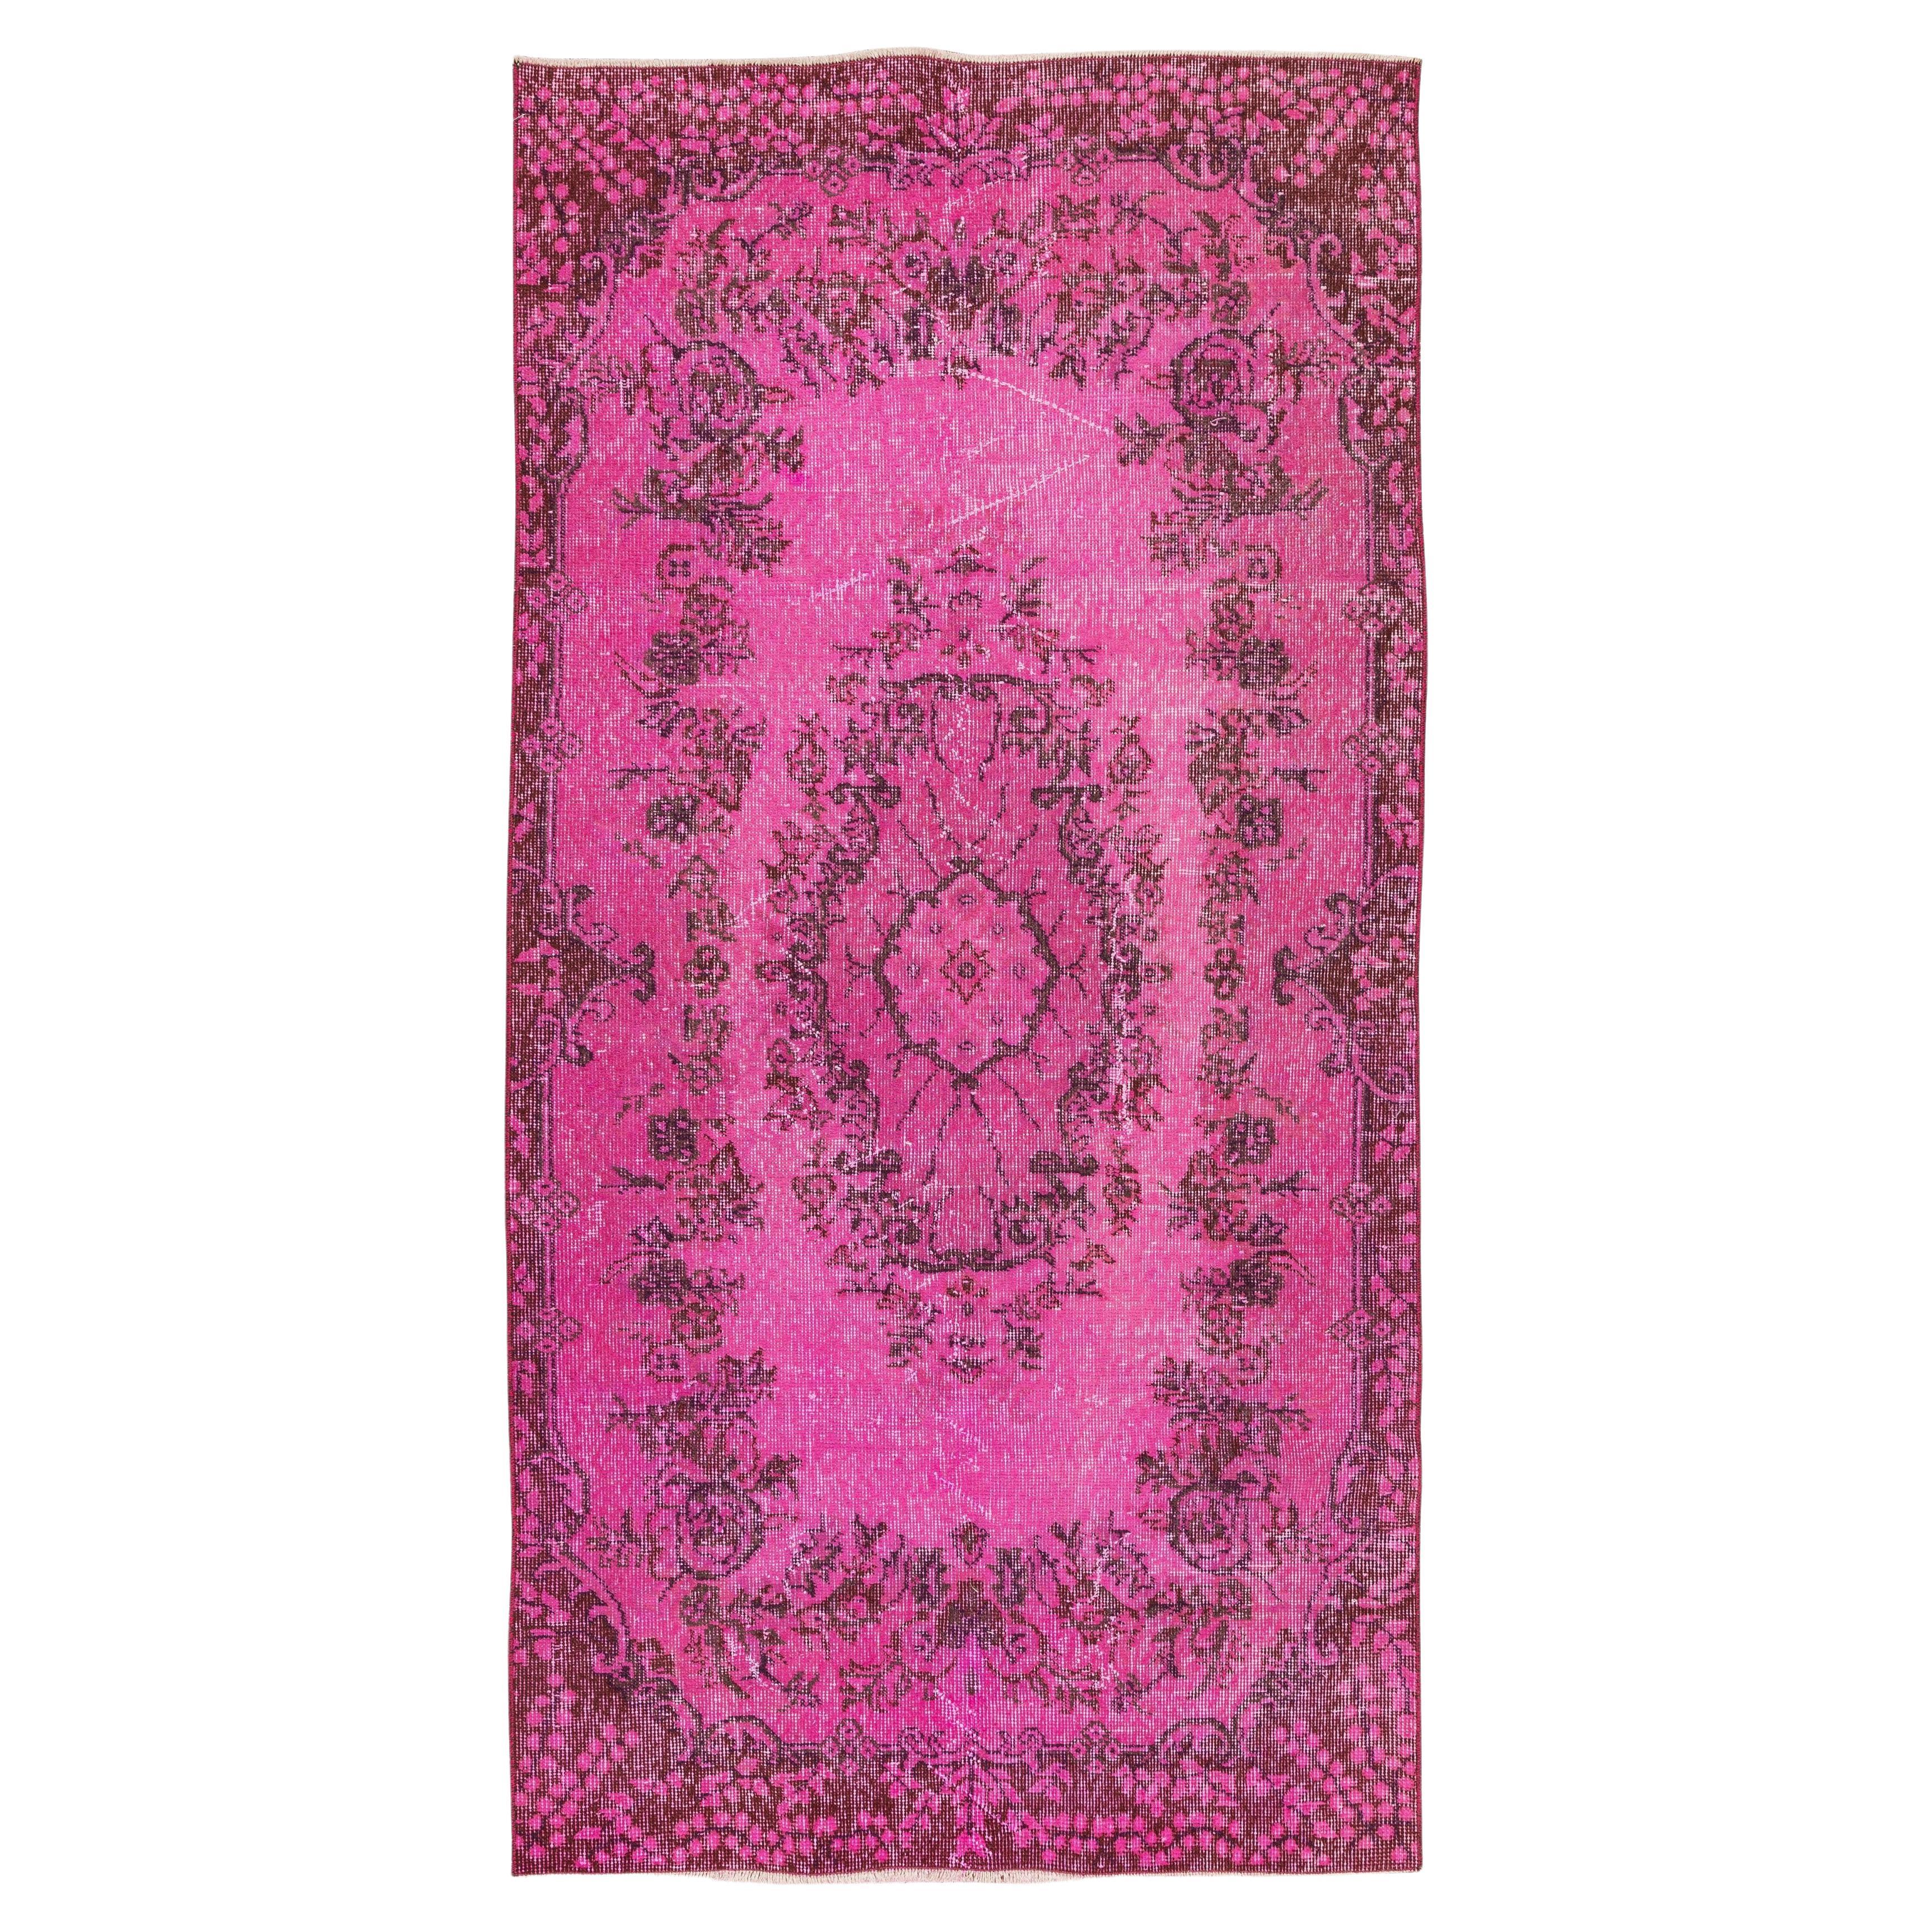 3.5x7 Ft Handmade Anatolian Accent Rug in Pink with Floral Medallion Design